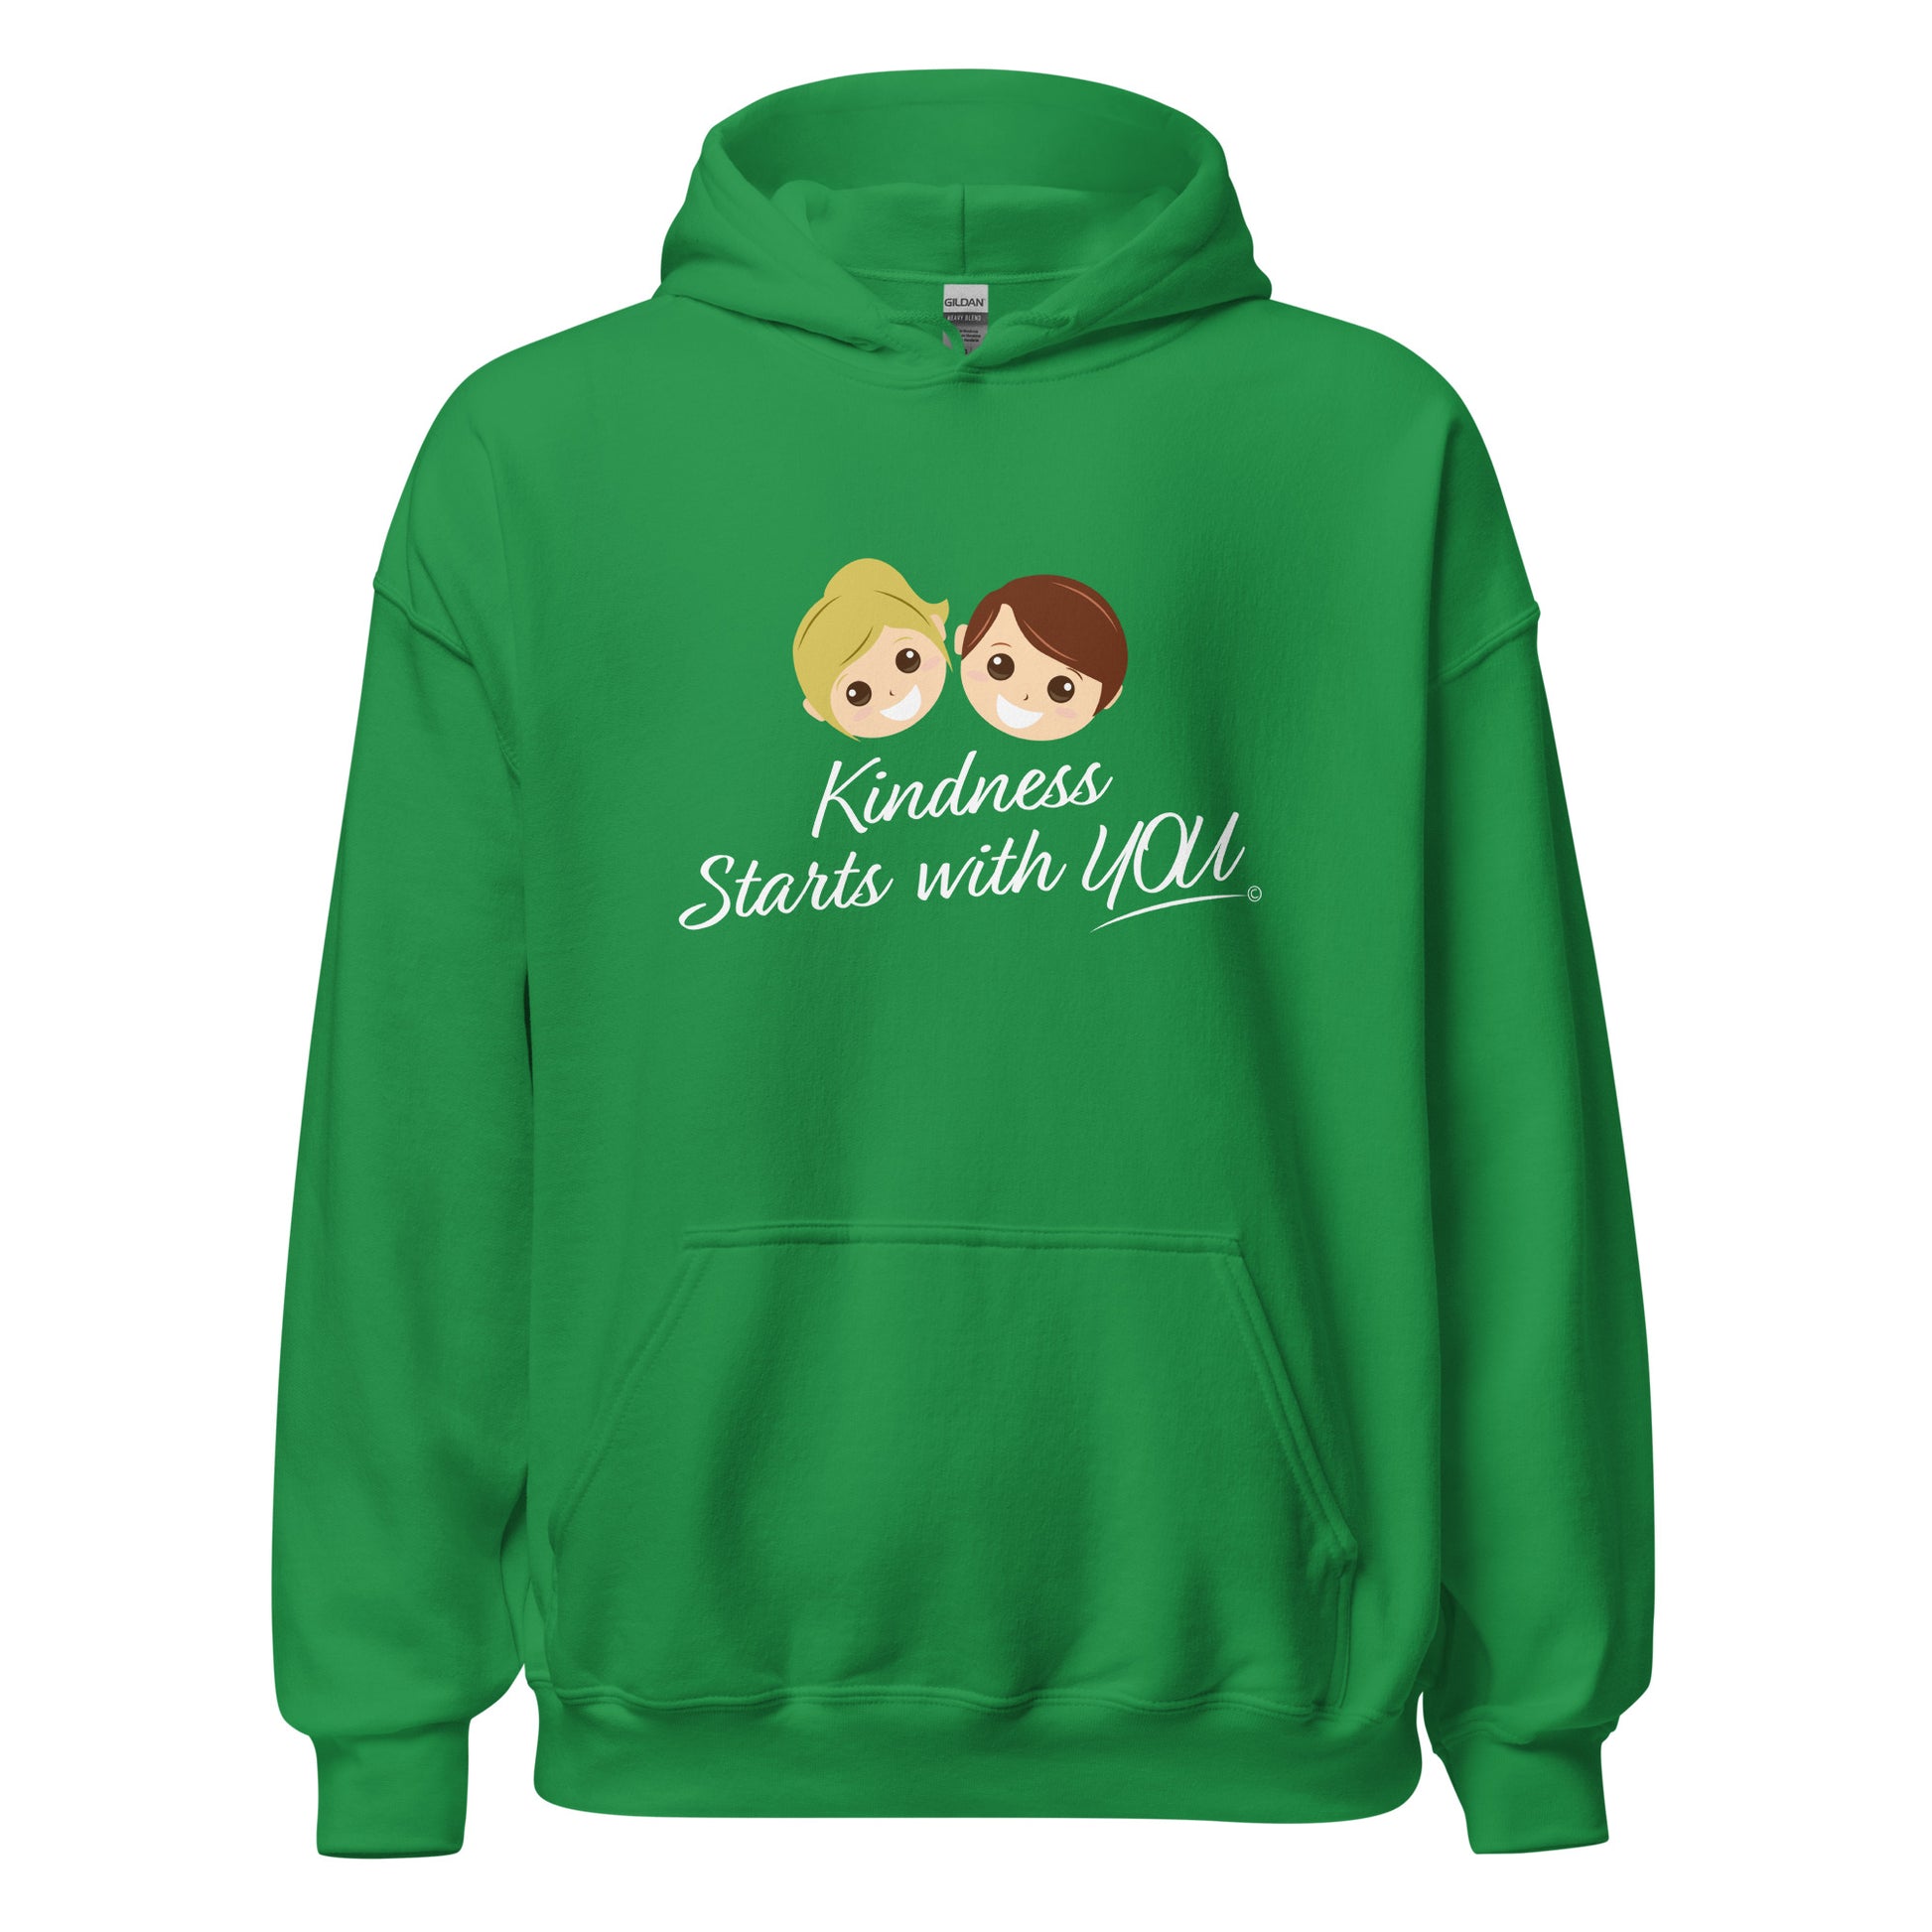 A cozy unisex hoodie in irish green, featuring the uplifting quote 'Kindness Starts with You' in bold lettering.